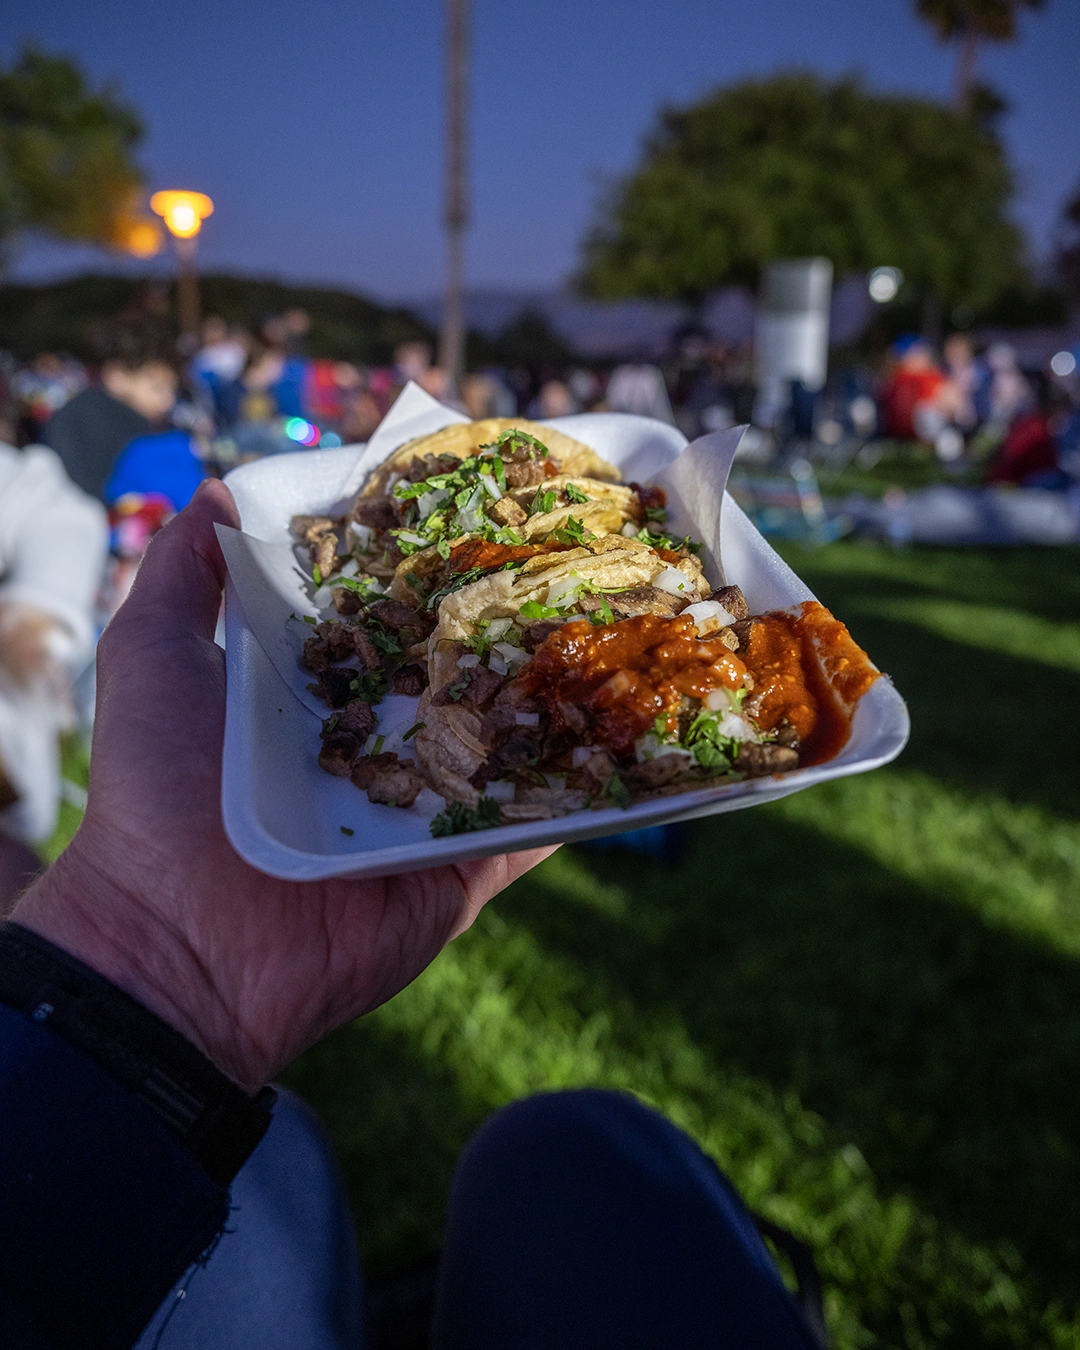 Food at the Chula Vista 4th Fest event